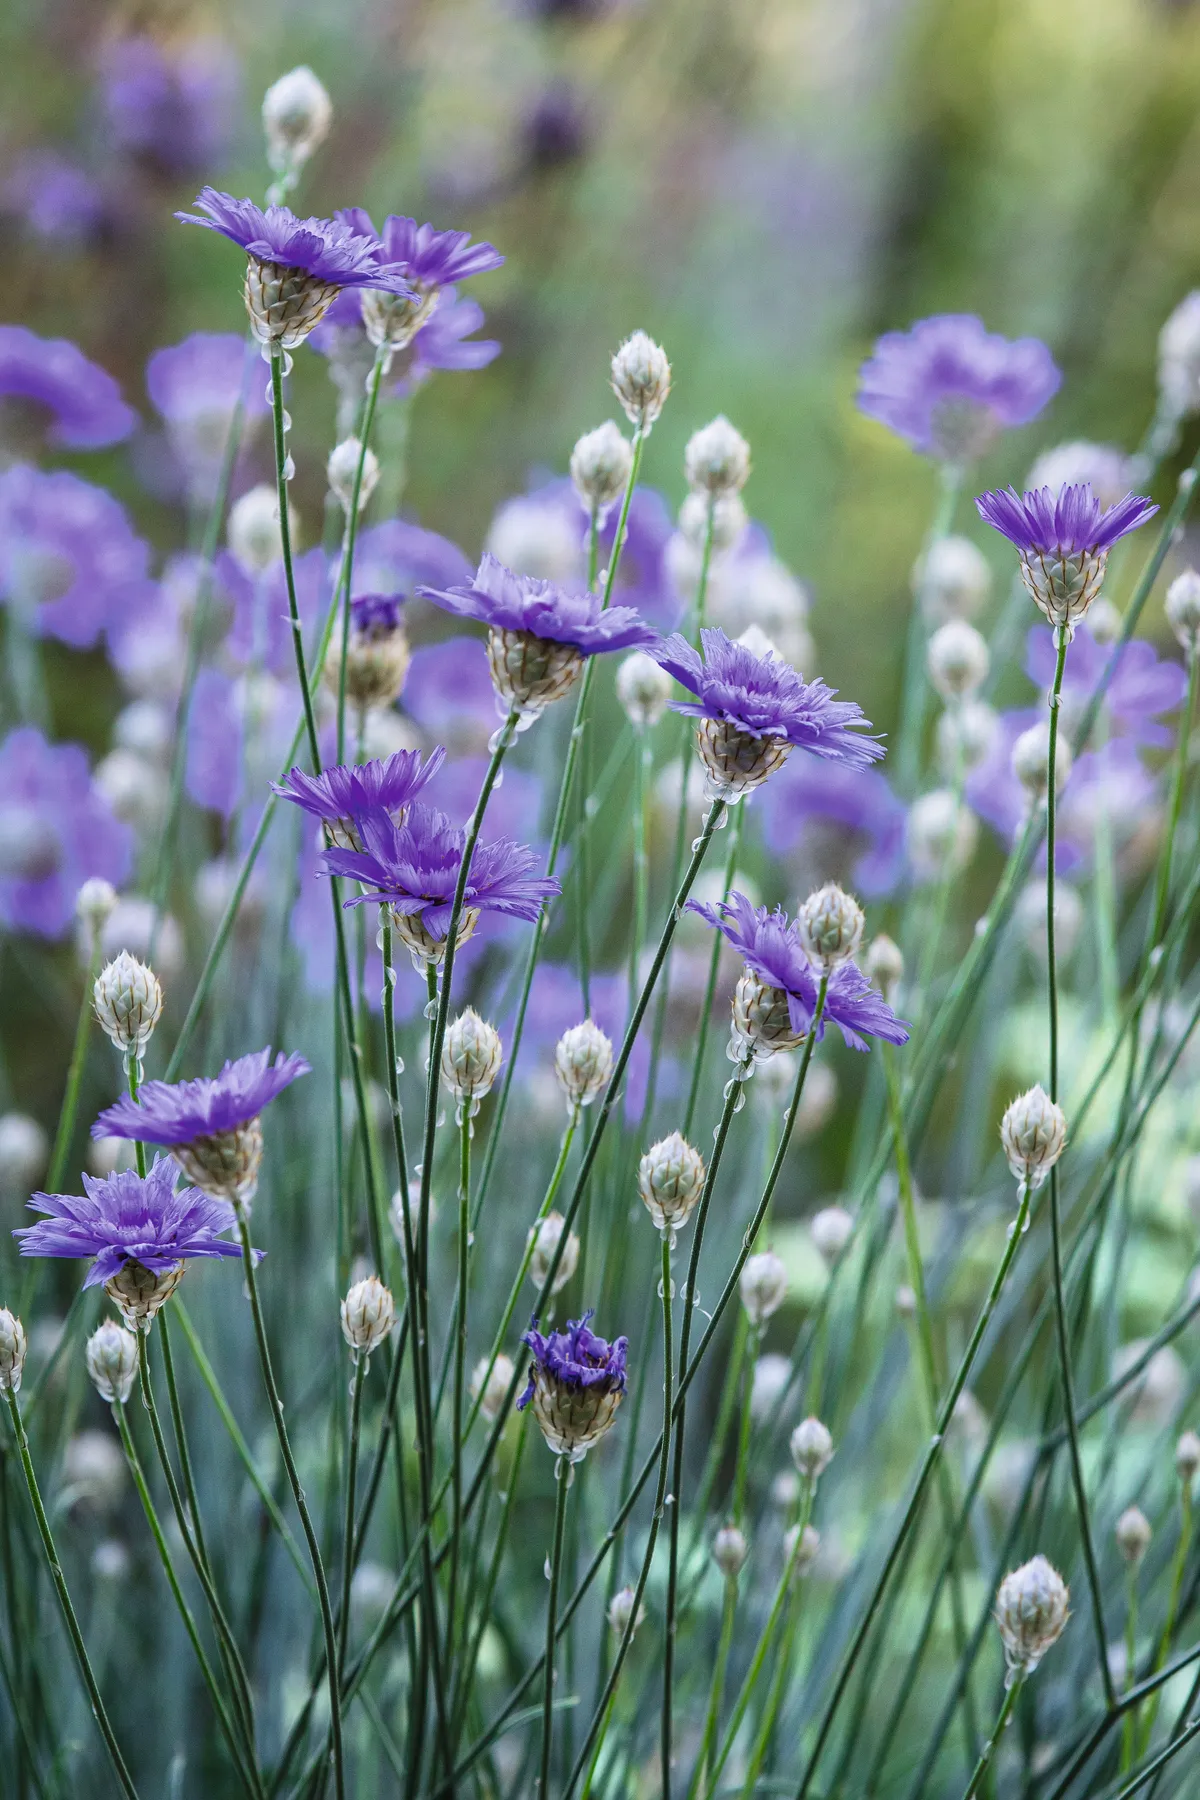 Catananche caerulea Greyish foliage with flowers on 1m-high stems. Plants are narrow so best grown in groups or intermingled with other plants. Short-lived perennial. 1m x 30cm. RHS H5, USDA 4a-7b† .